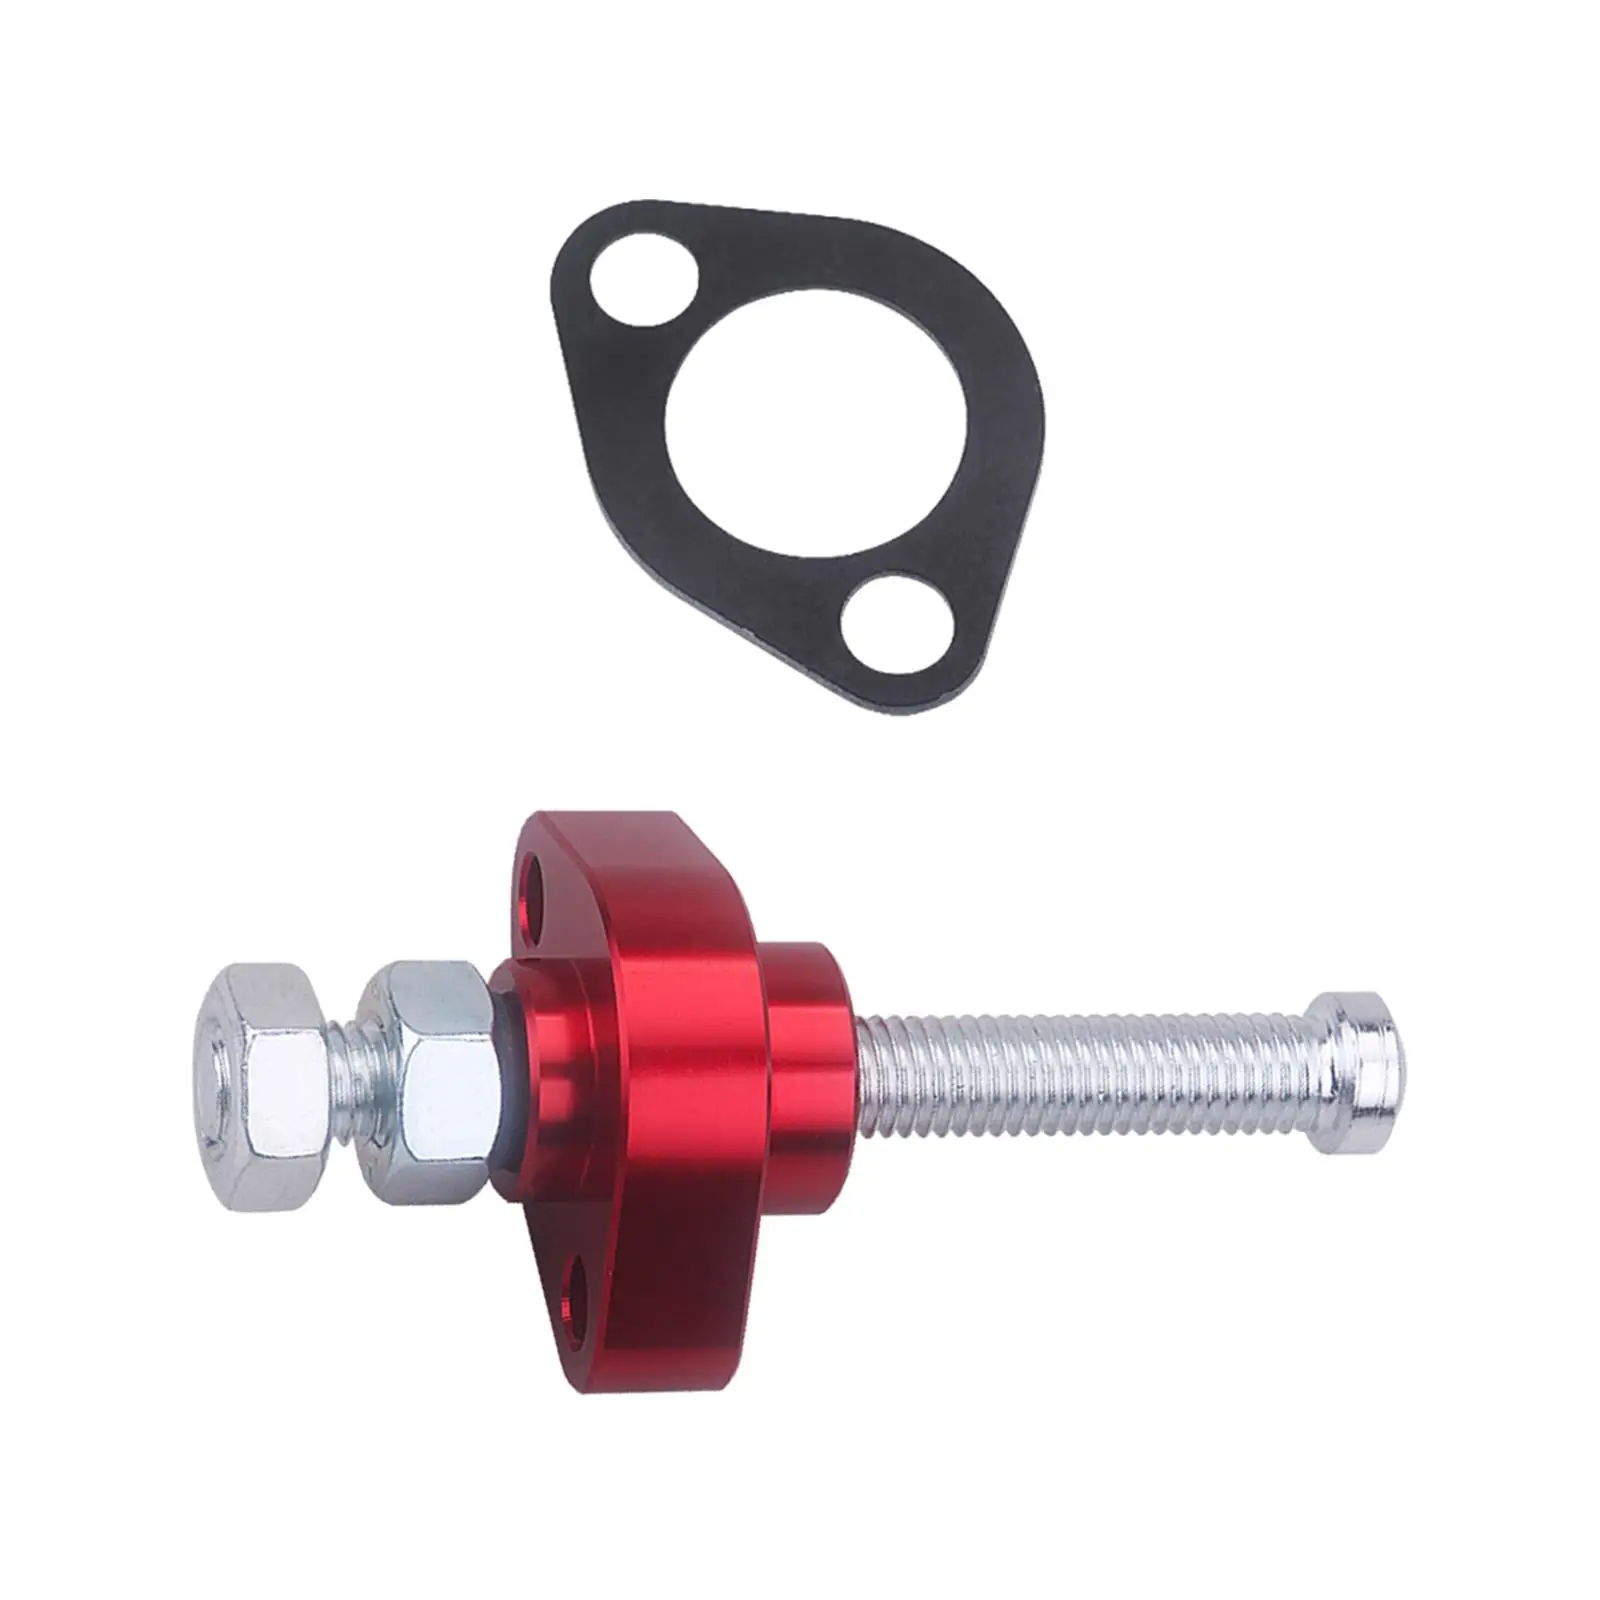 Timing Chain Tensioner Timing Chain Camshaft Tensioner for F3 F4 CBR900 Rr